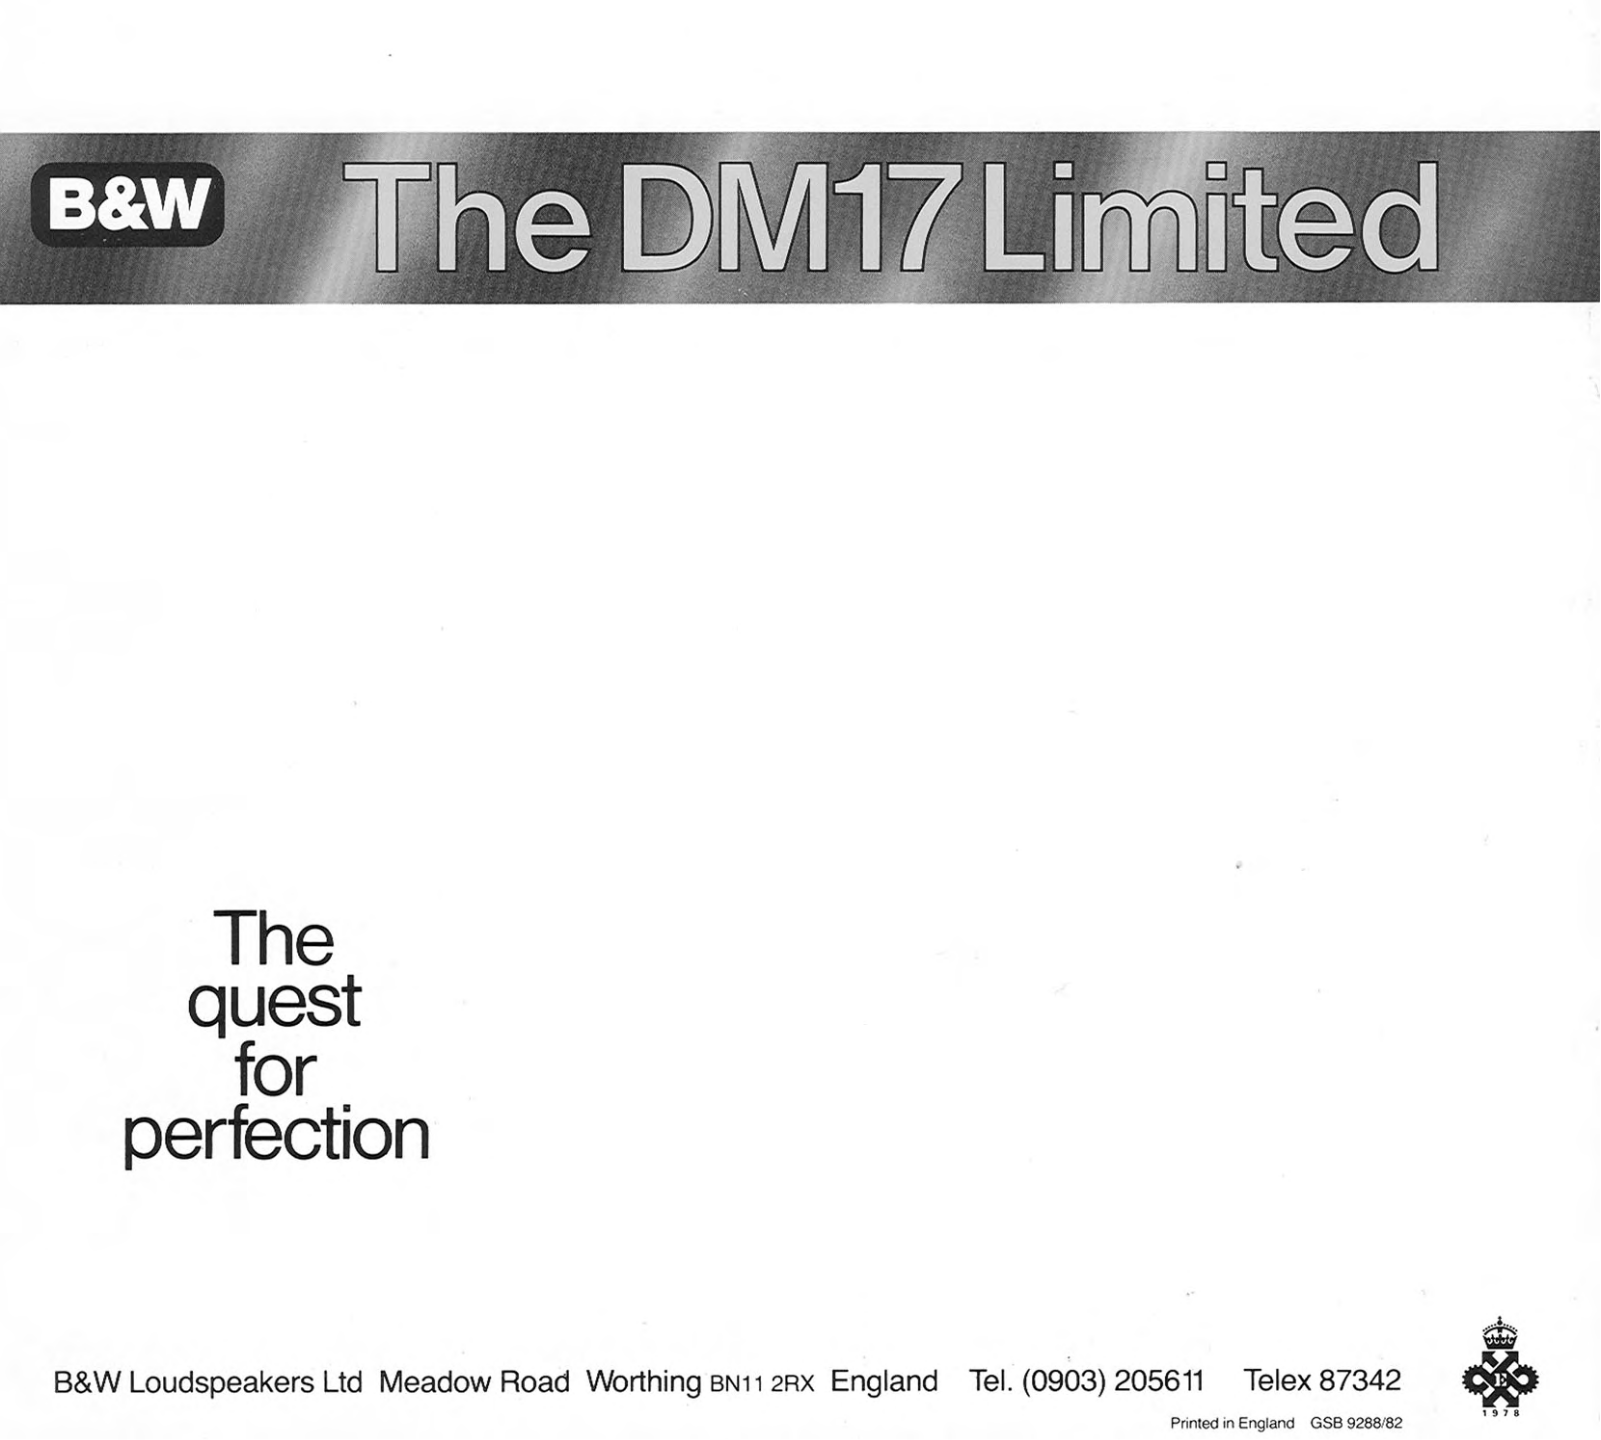 Bowers and Wilkins DM-17, DM-17 Limited Brochure